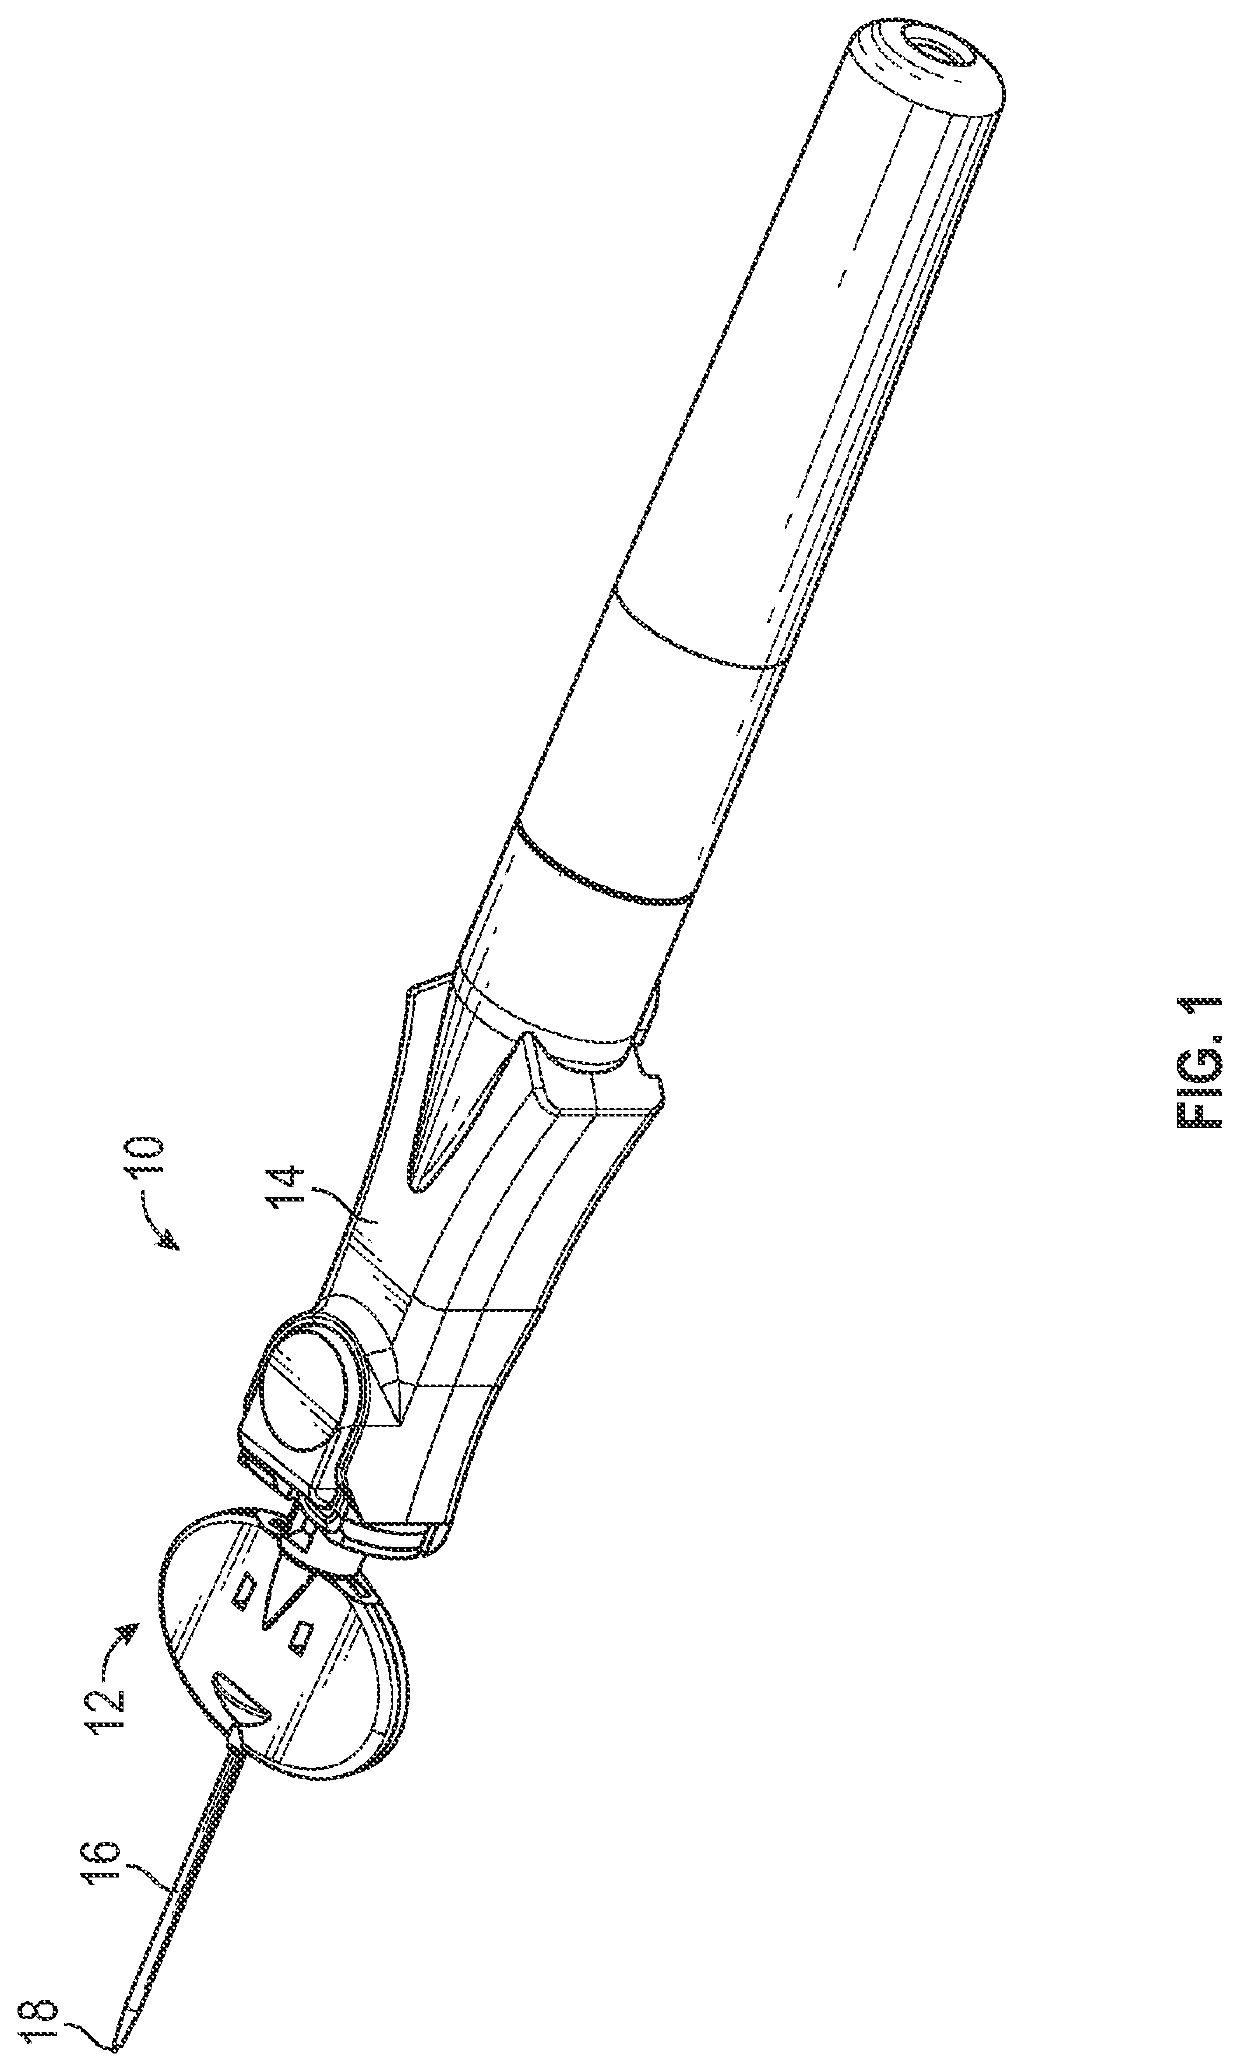 Low-profile extension for a catheter assembly